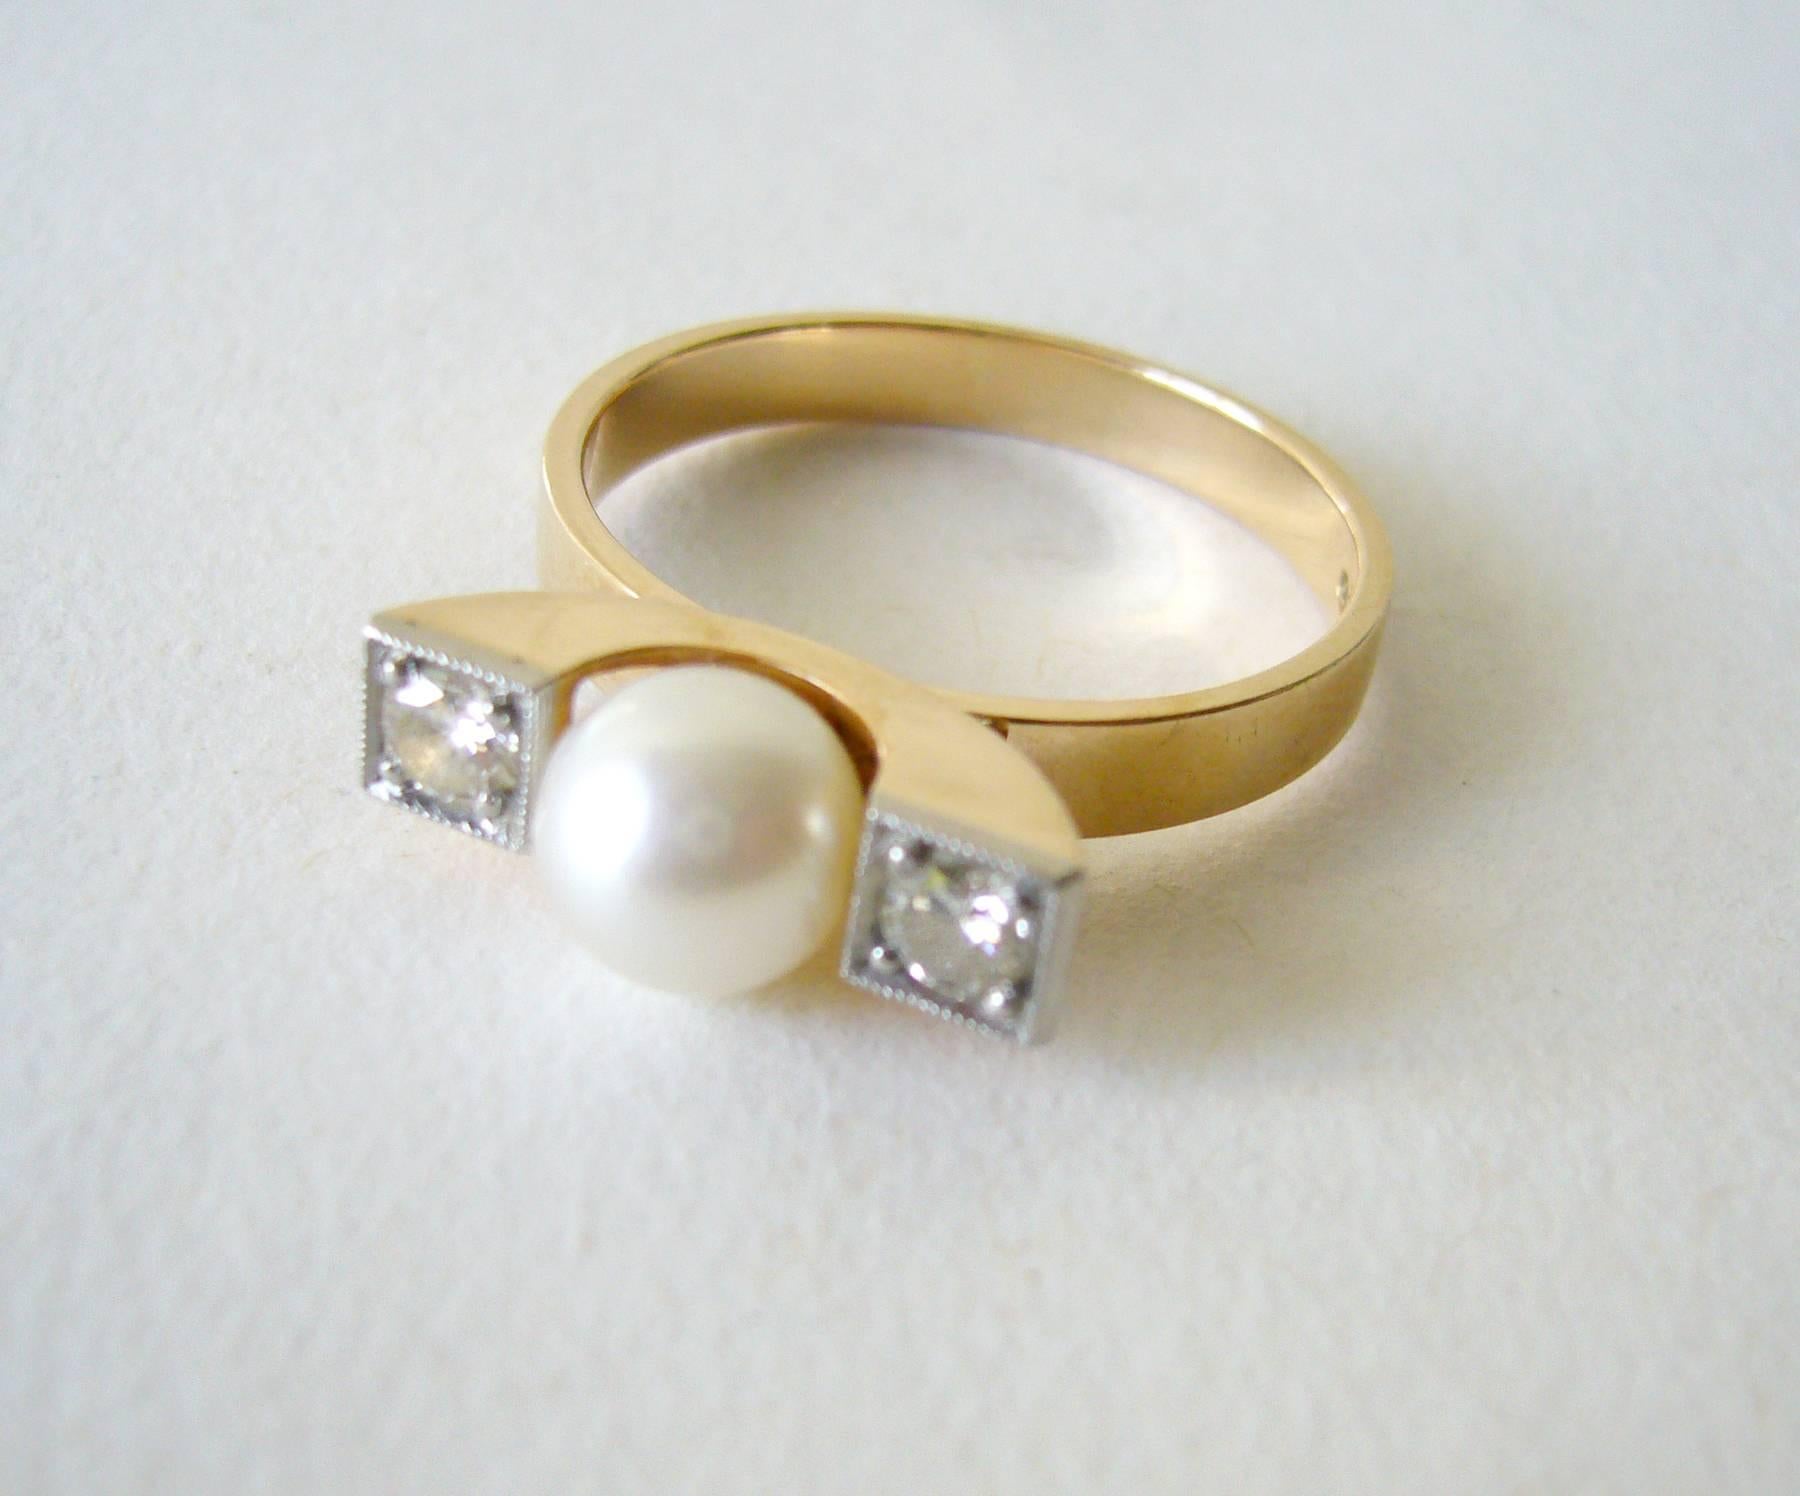 Finnish modernist 14k gold ring with diamonds and 7mm pearl created by Elis Kauppi for Kupitaan Kulta.  Ring is a finger size 9.5 and is signed with the Anvil mark for Kupitaan Kulta, S7 (1971), 585.  Suitable for a modern day engagement or wedding